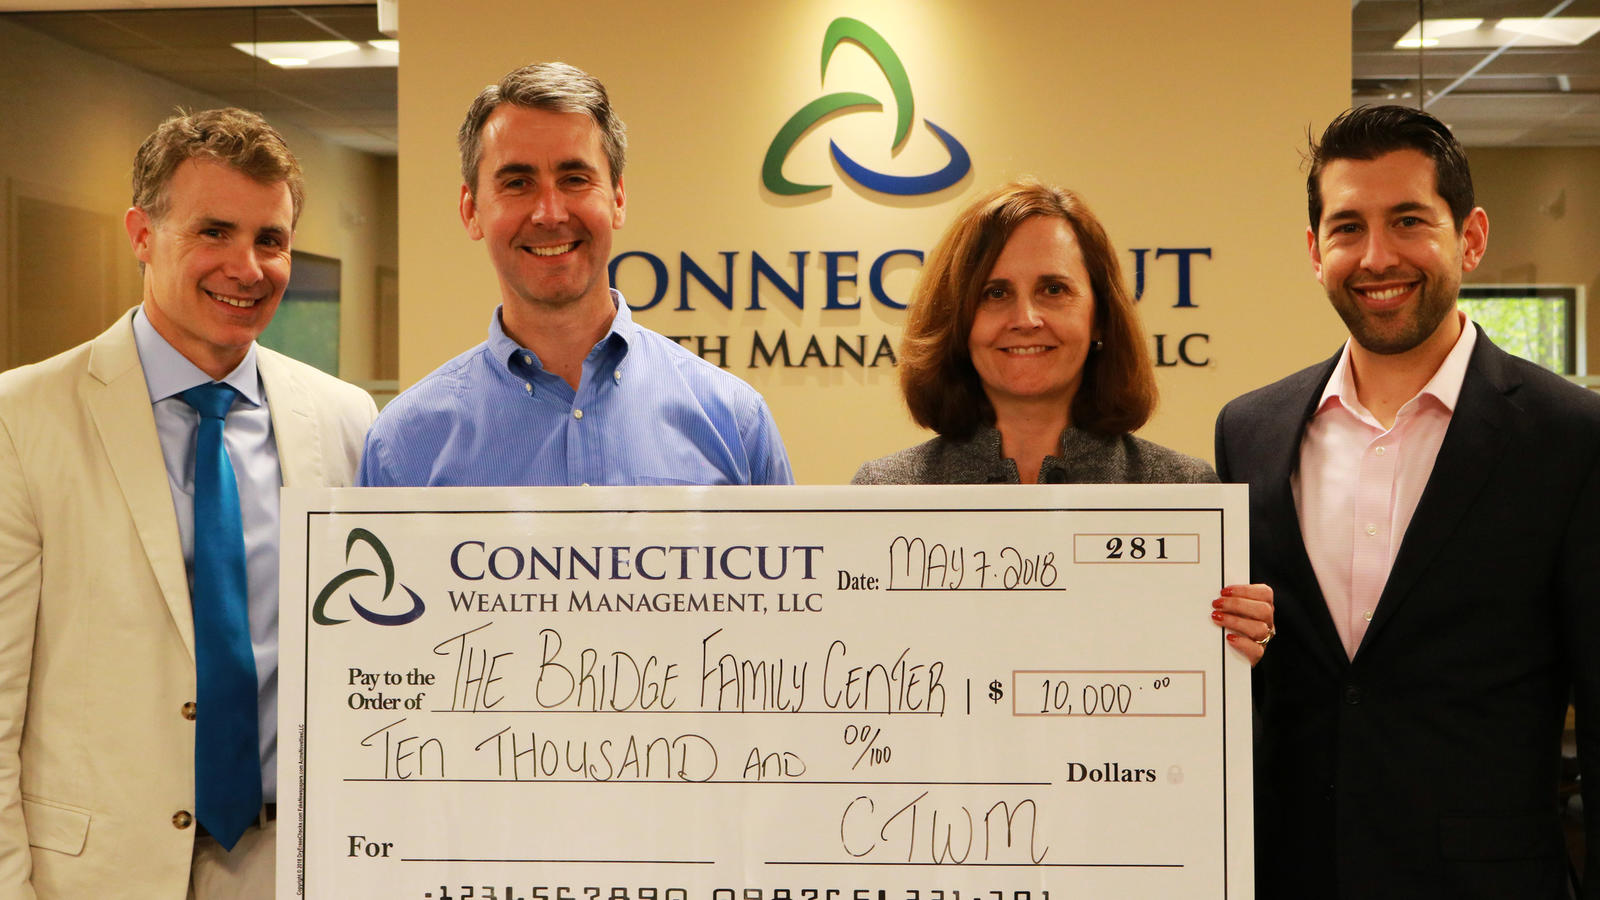 Members of Connecticut Wealth Management with a $10,000 check donation for The Bridge Family Center